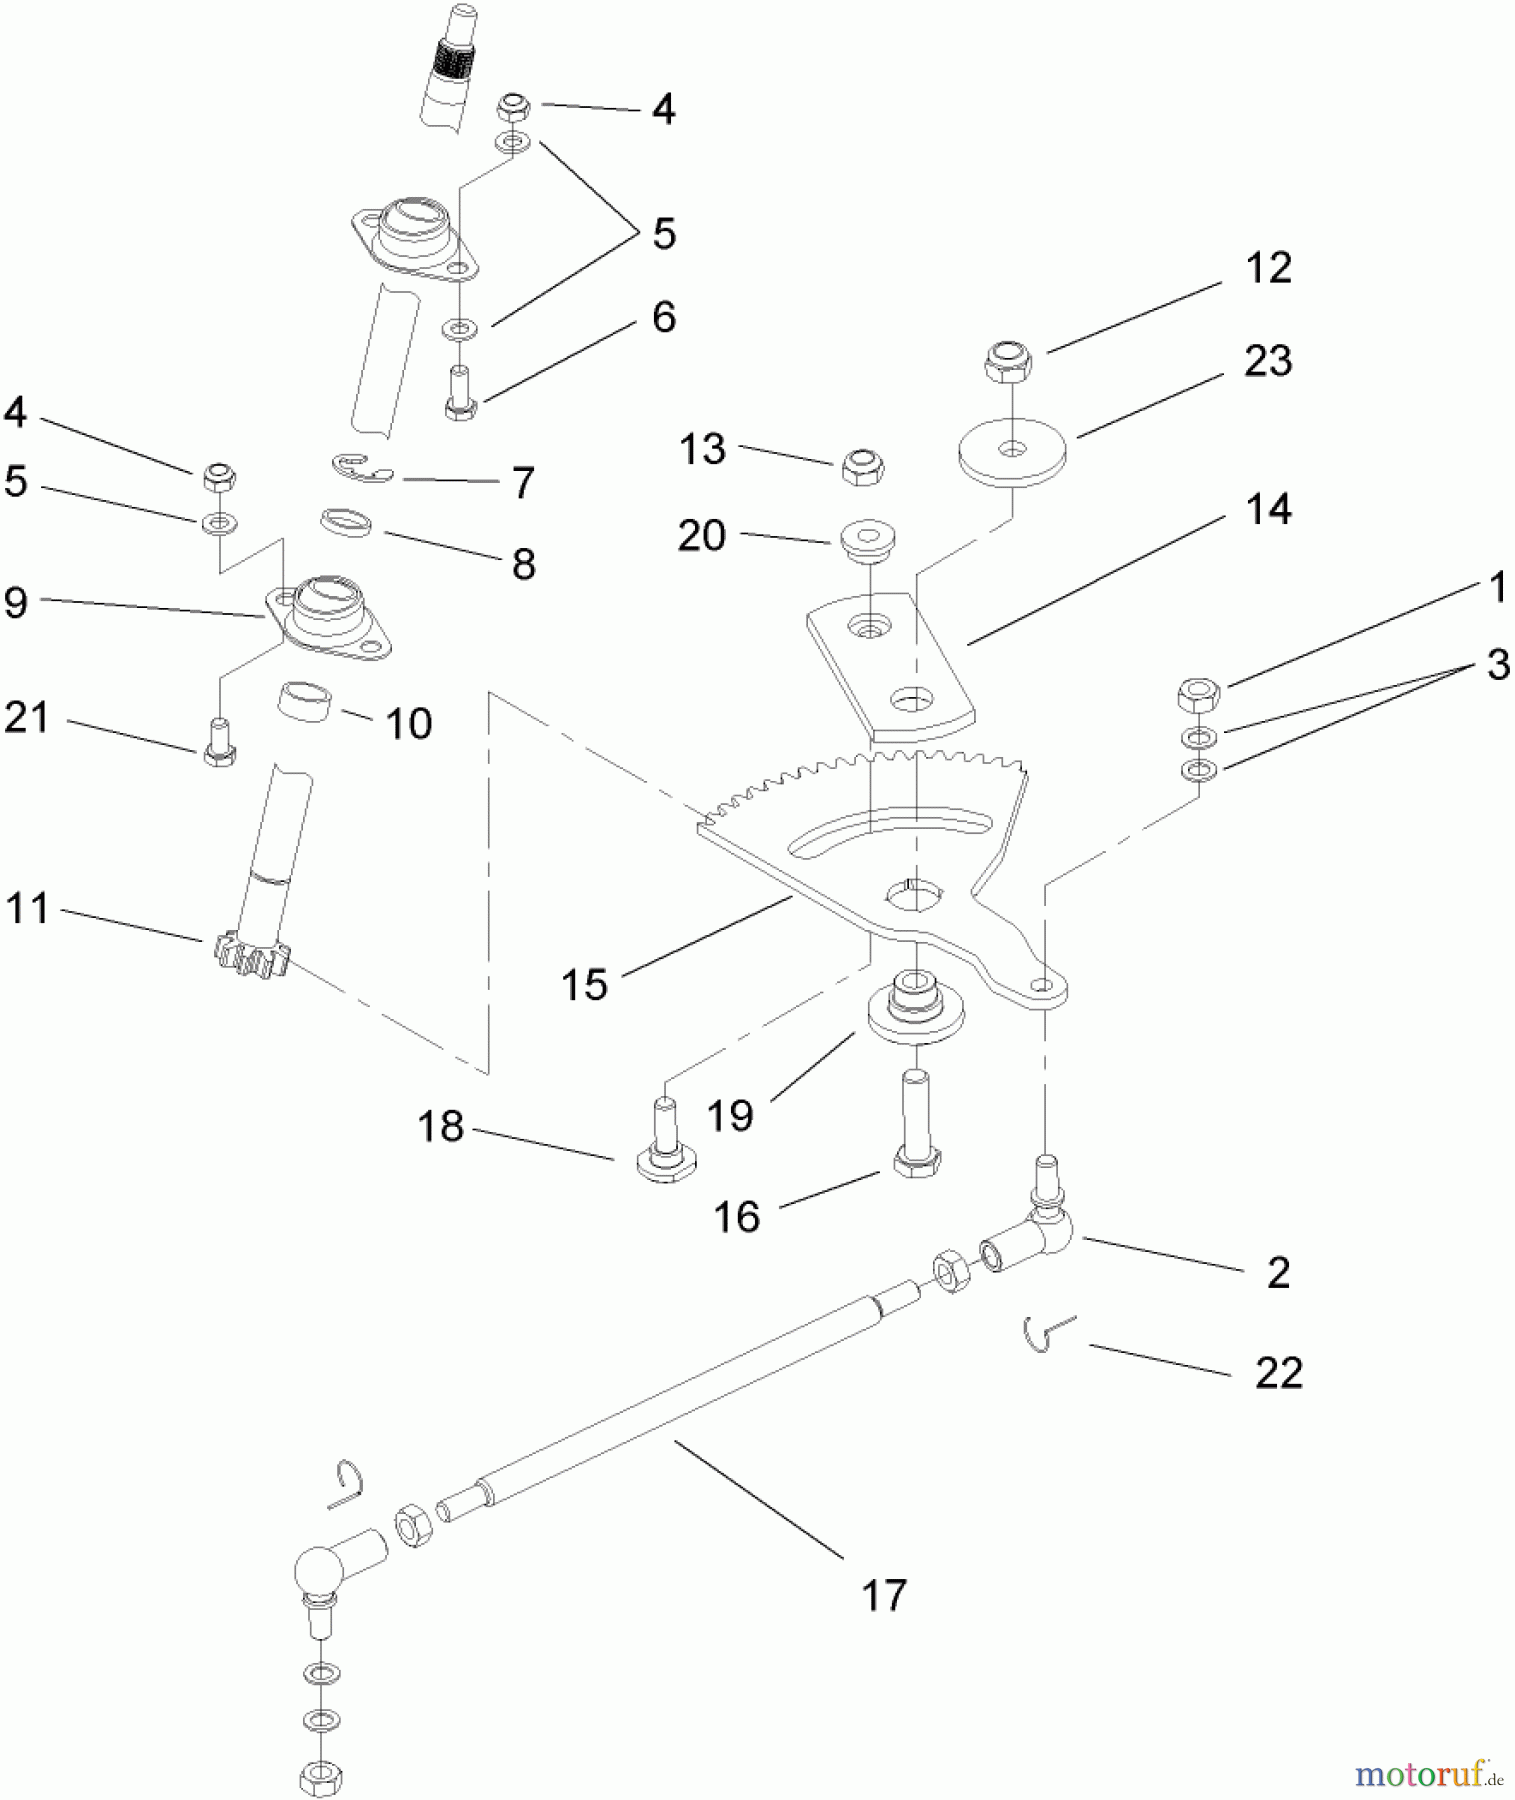  Toro Neu Mowers, Lawn & Garden Tractor Seite 1 74592 (DH 220) - Toro DH 220 Lawn Tractor, 2007 (270000652-270999999) STEERING ASSEMBLY